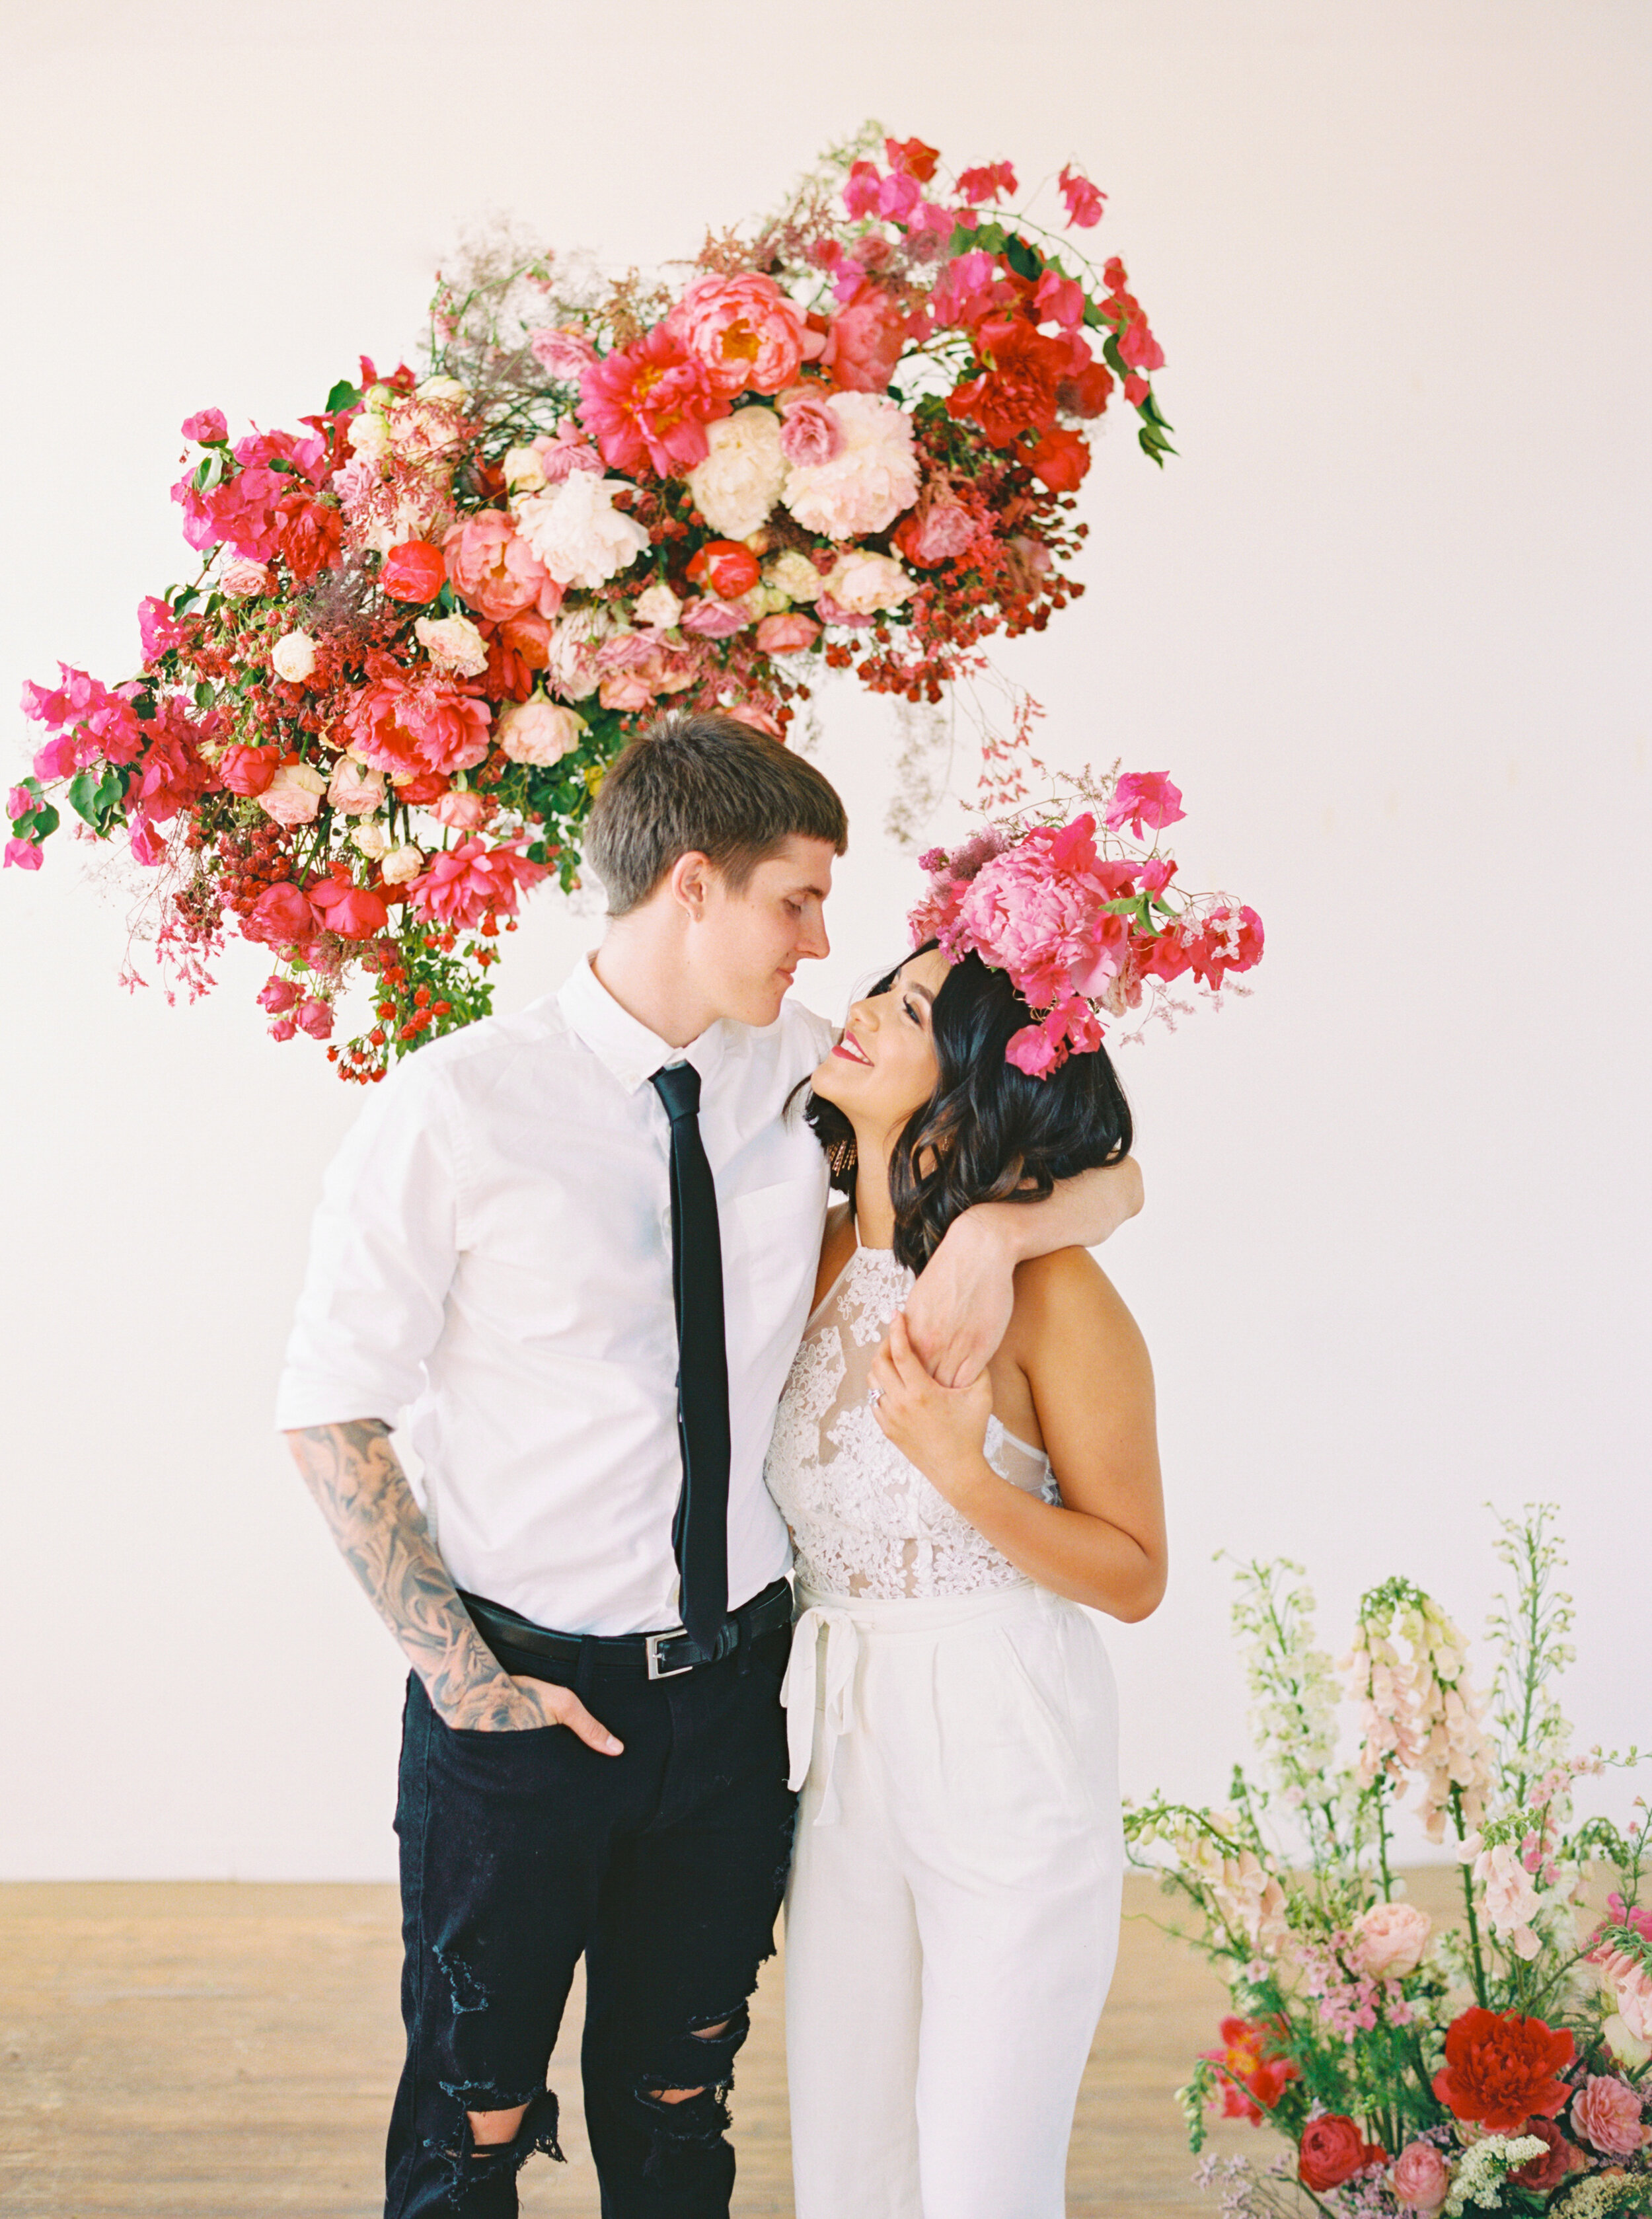 A Romantic Wedding Elopement Filled with Colorful Fuchsia - Sarahi Hadden Submission-125.jpg